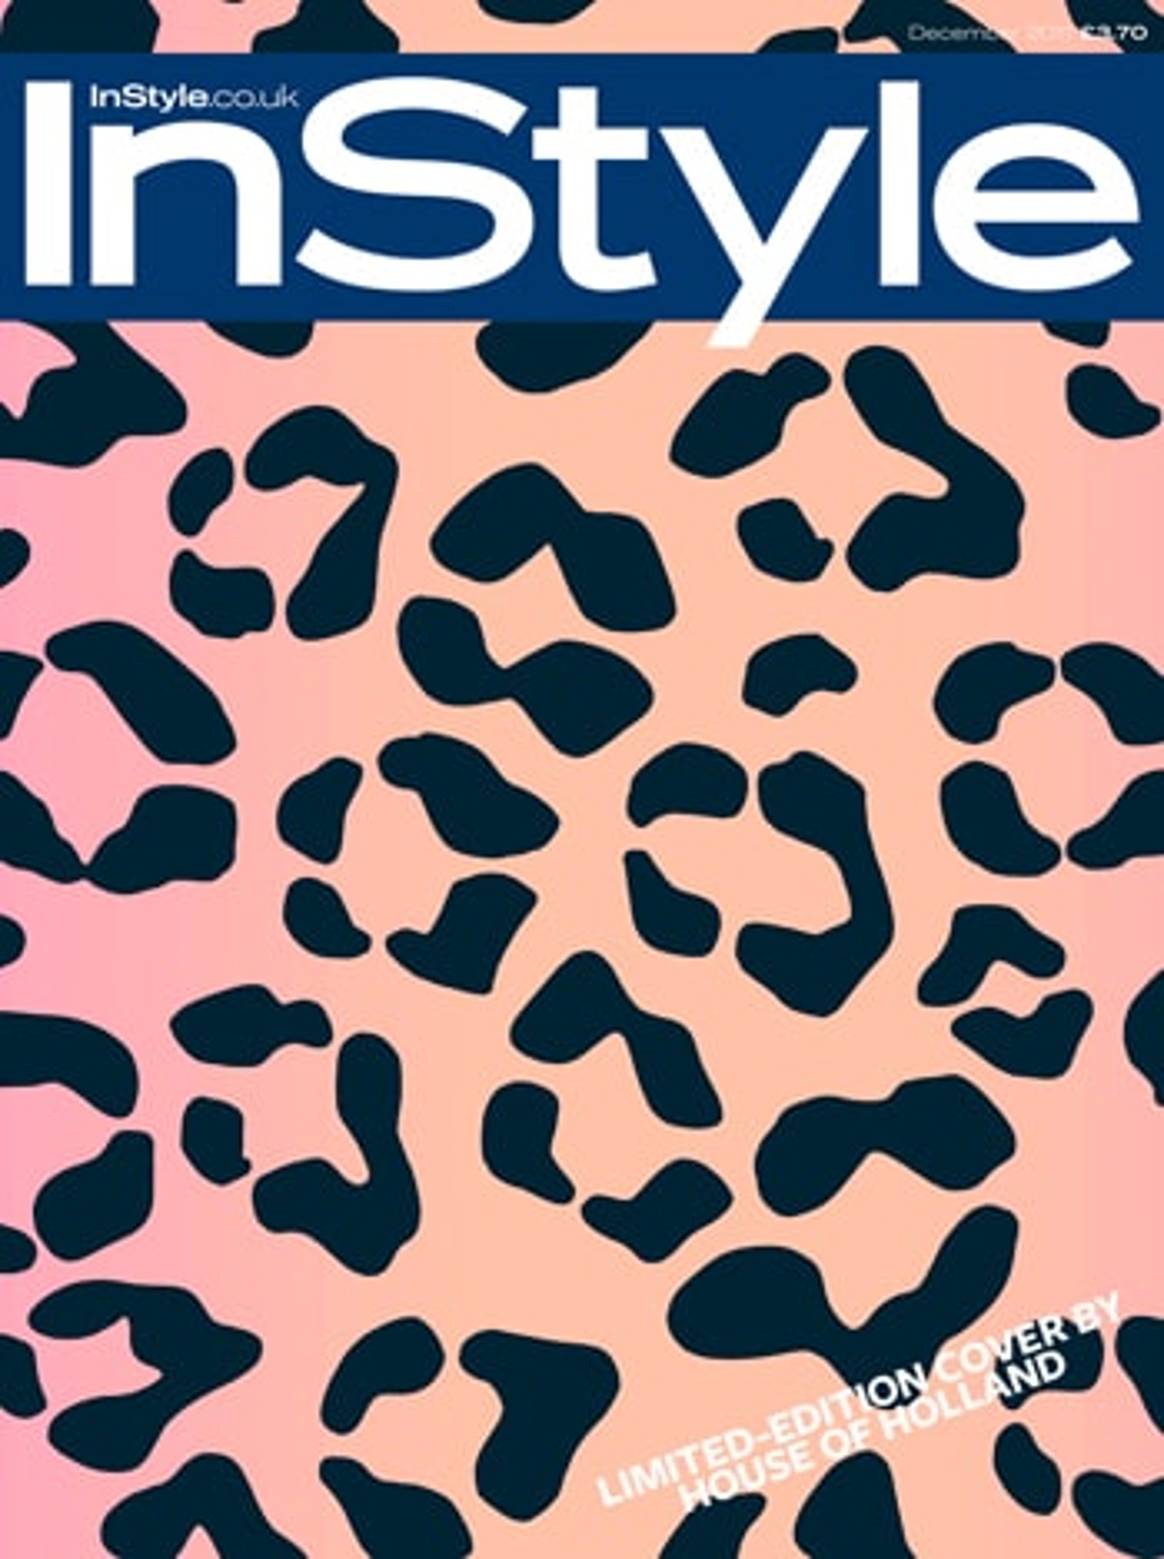 Henry Holland brings InStyle to life